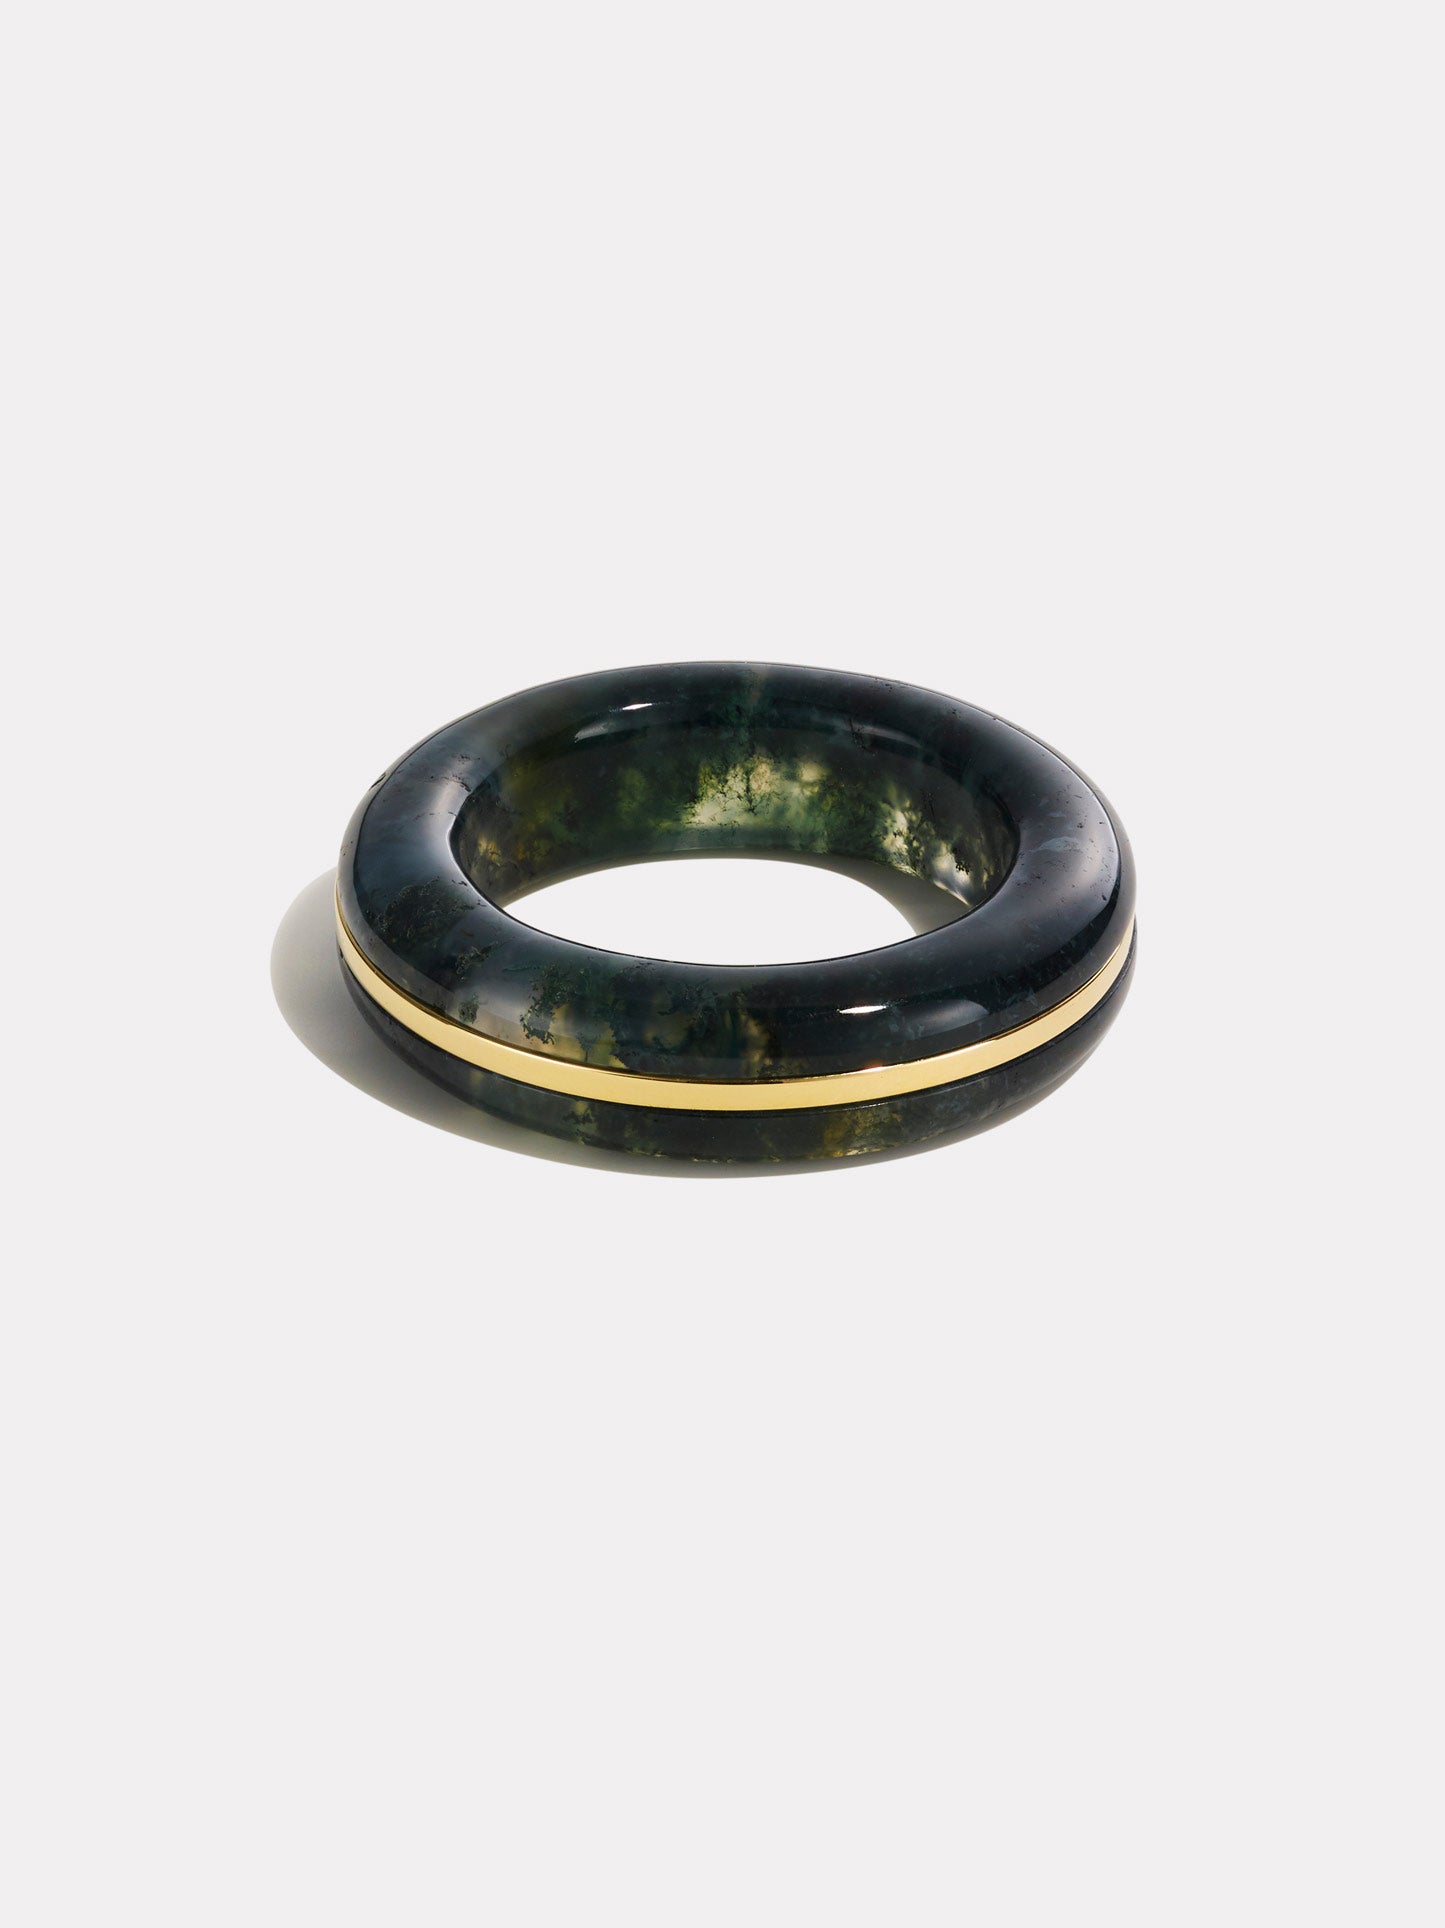 Essential Gem Stacking Ring - Green Moss Agate